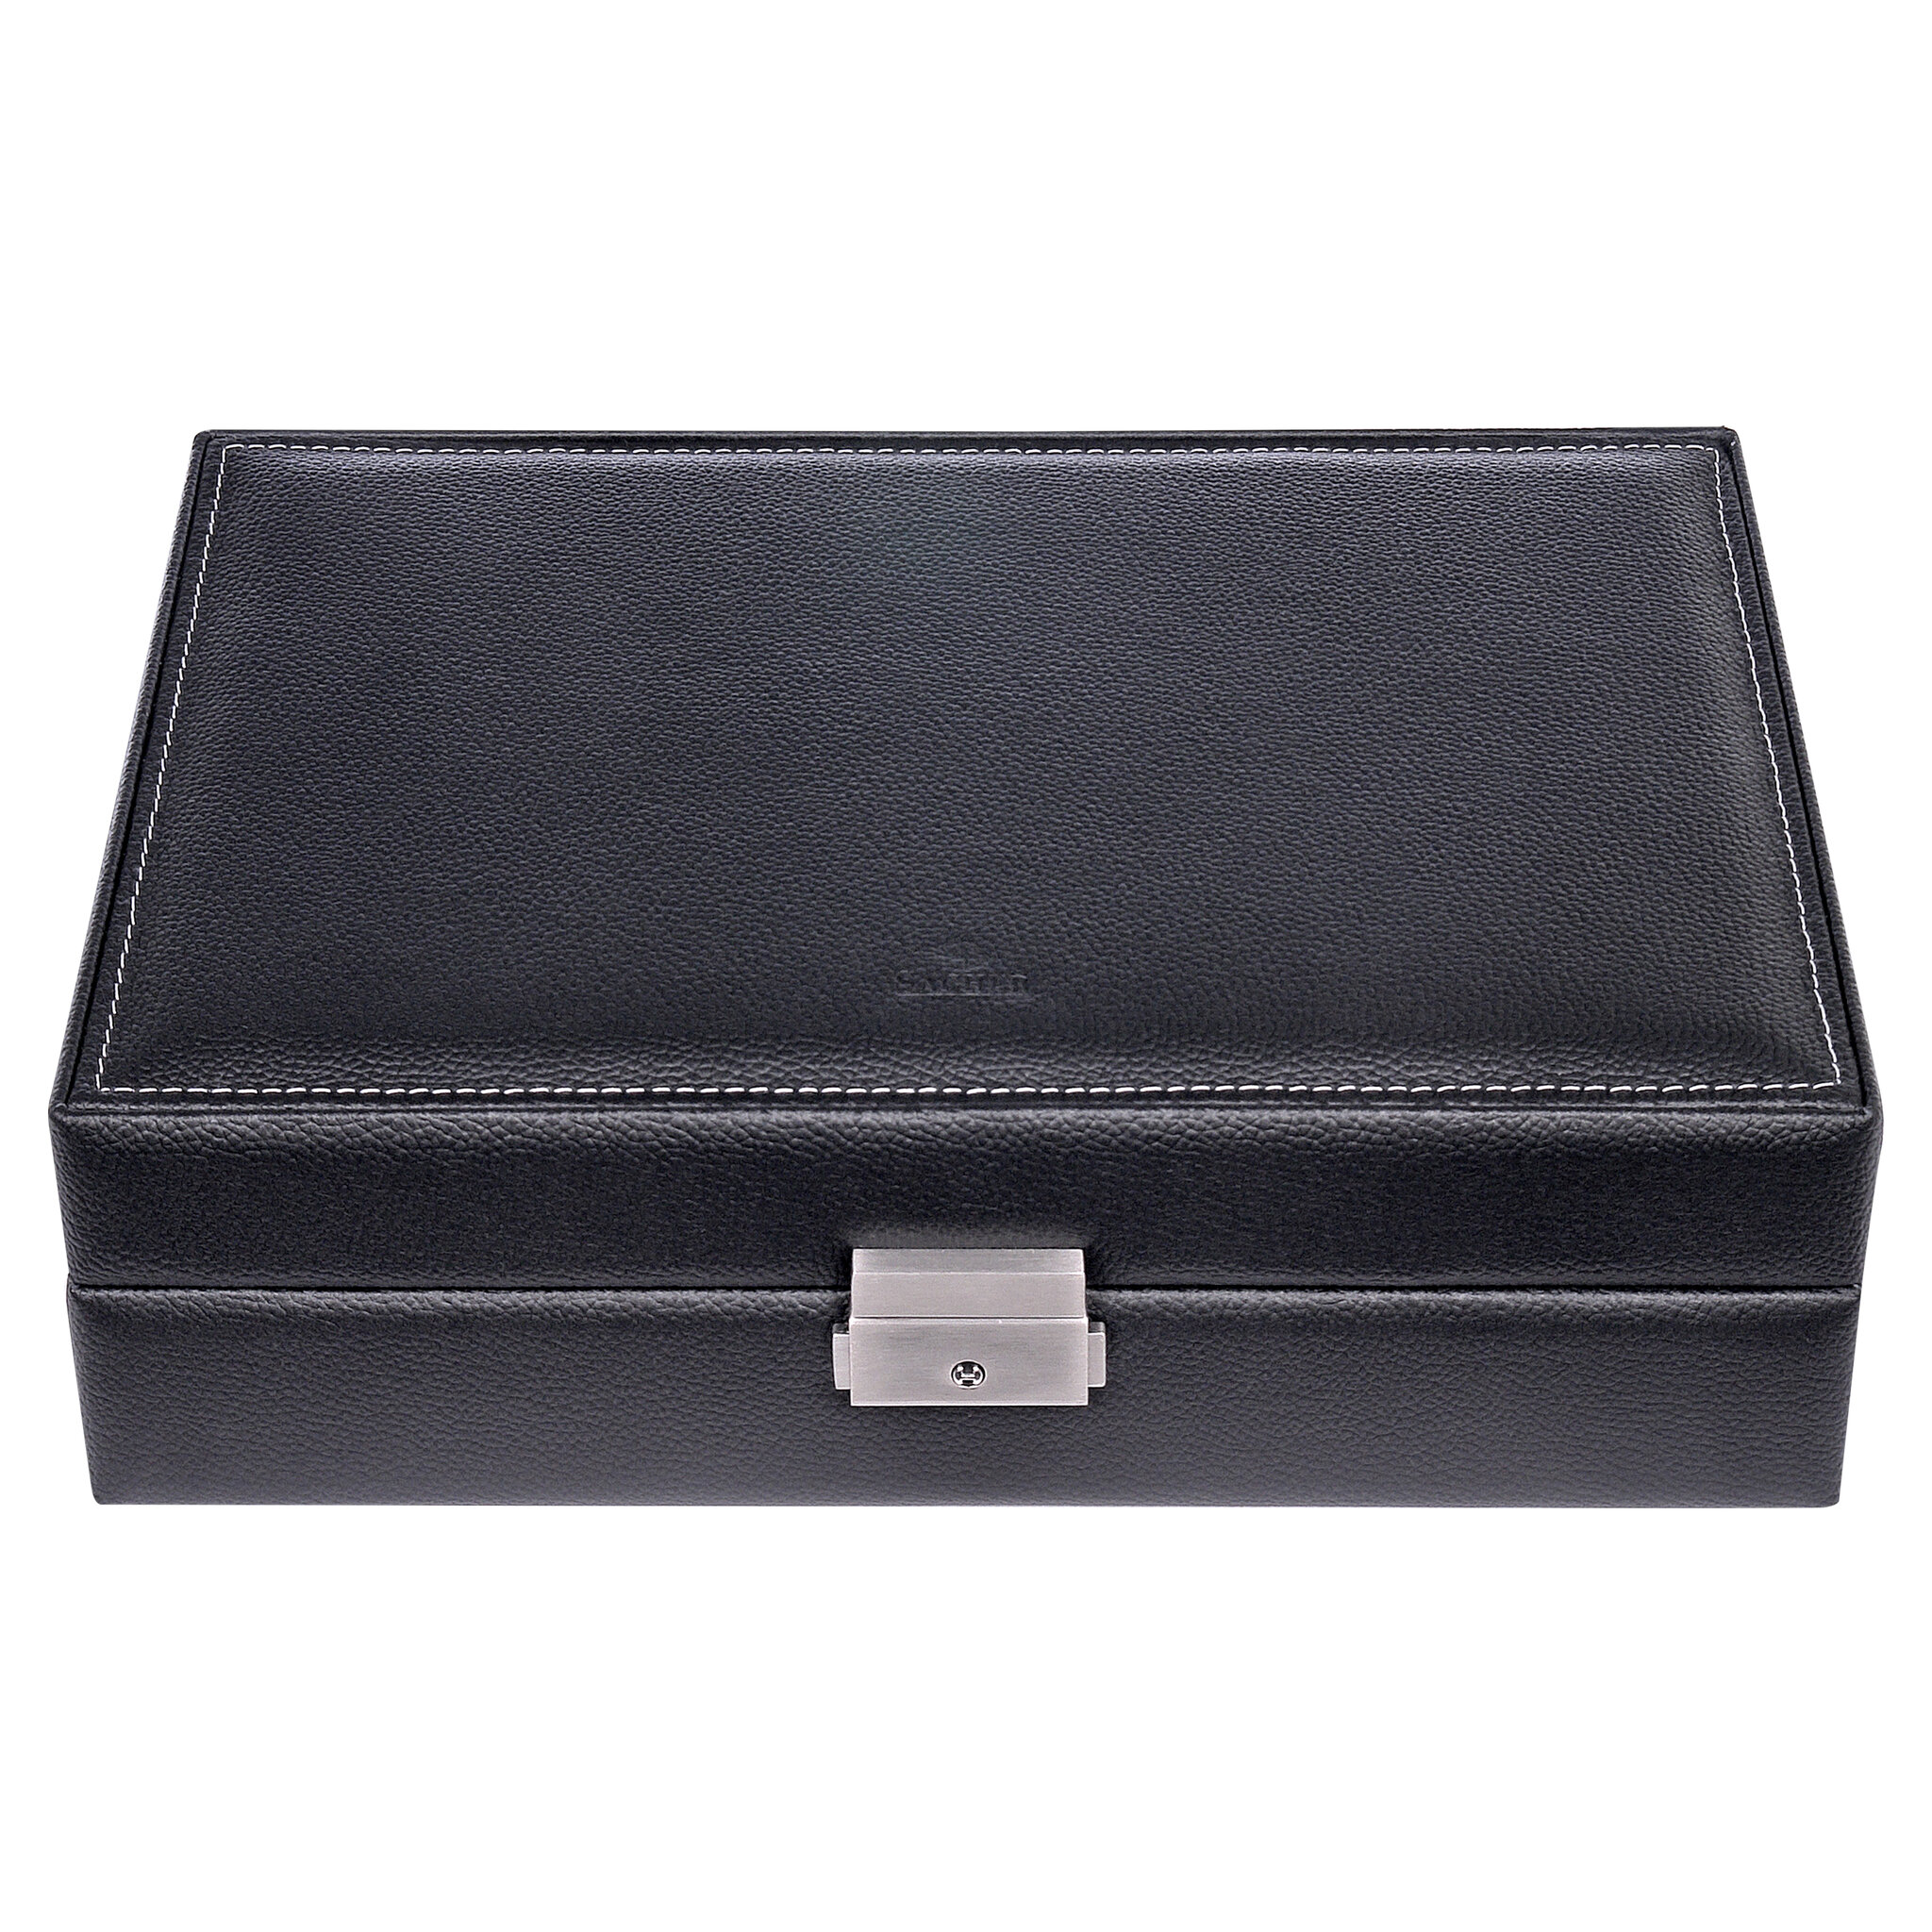 Watch case for 10 watches tamigi sport / black (leather) 